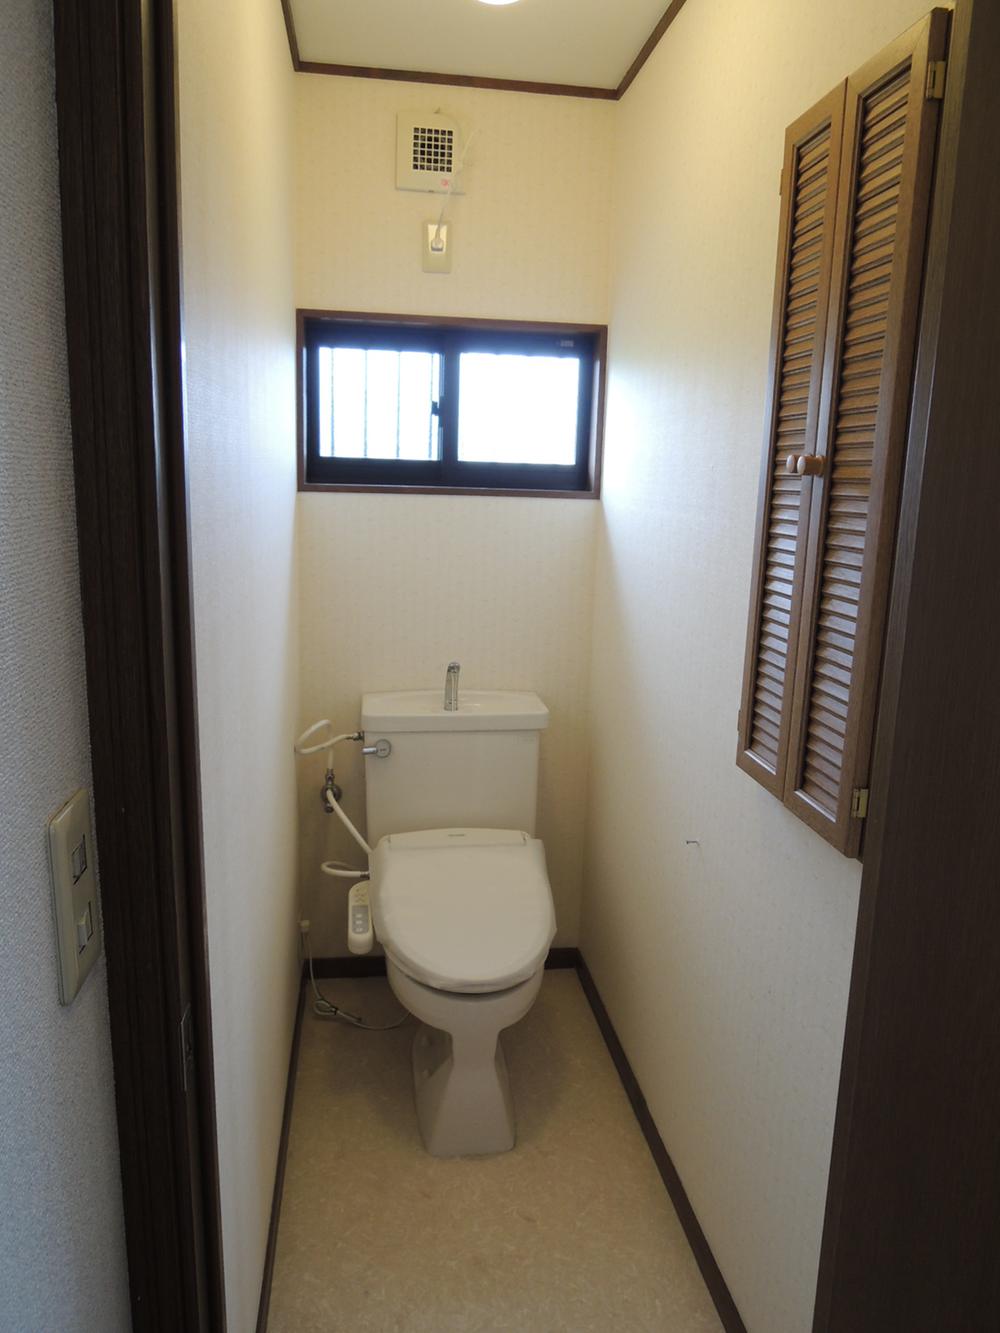 Toilet. Wall with storage function toilet